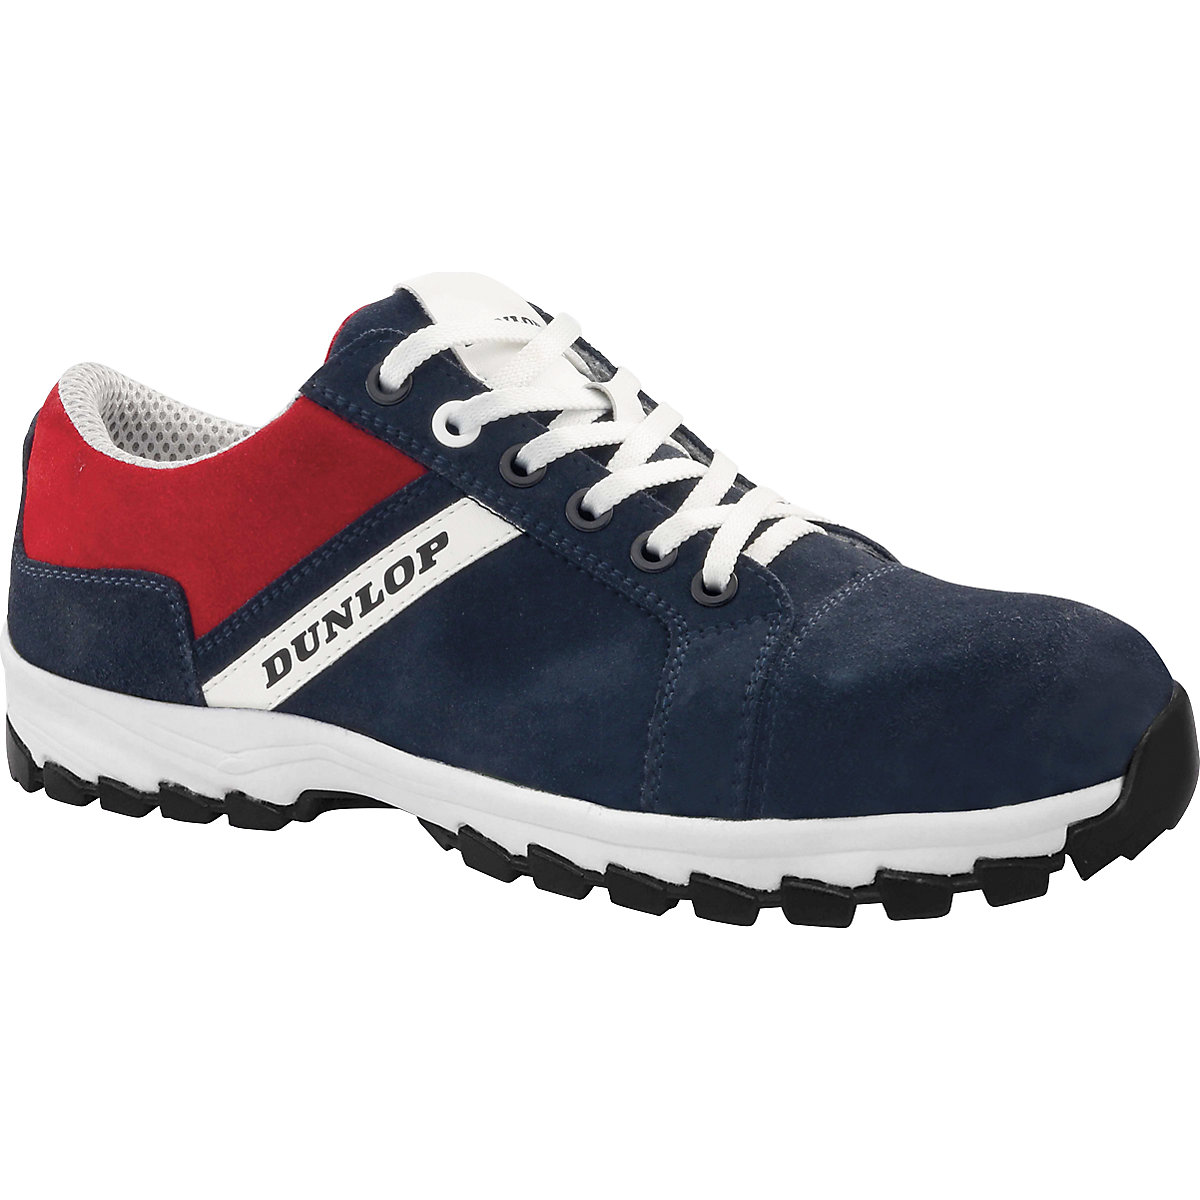 STREET RESPONSE BLUE S3 safety lace-up shoes – DUNLOP